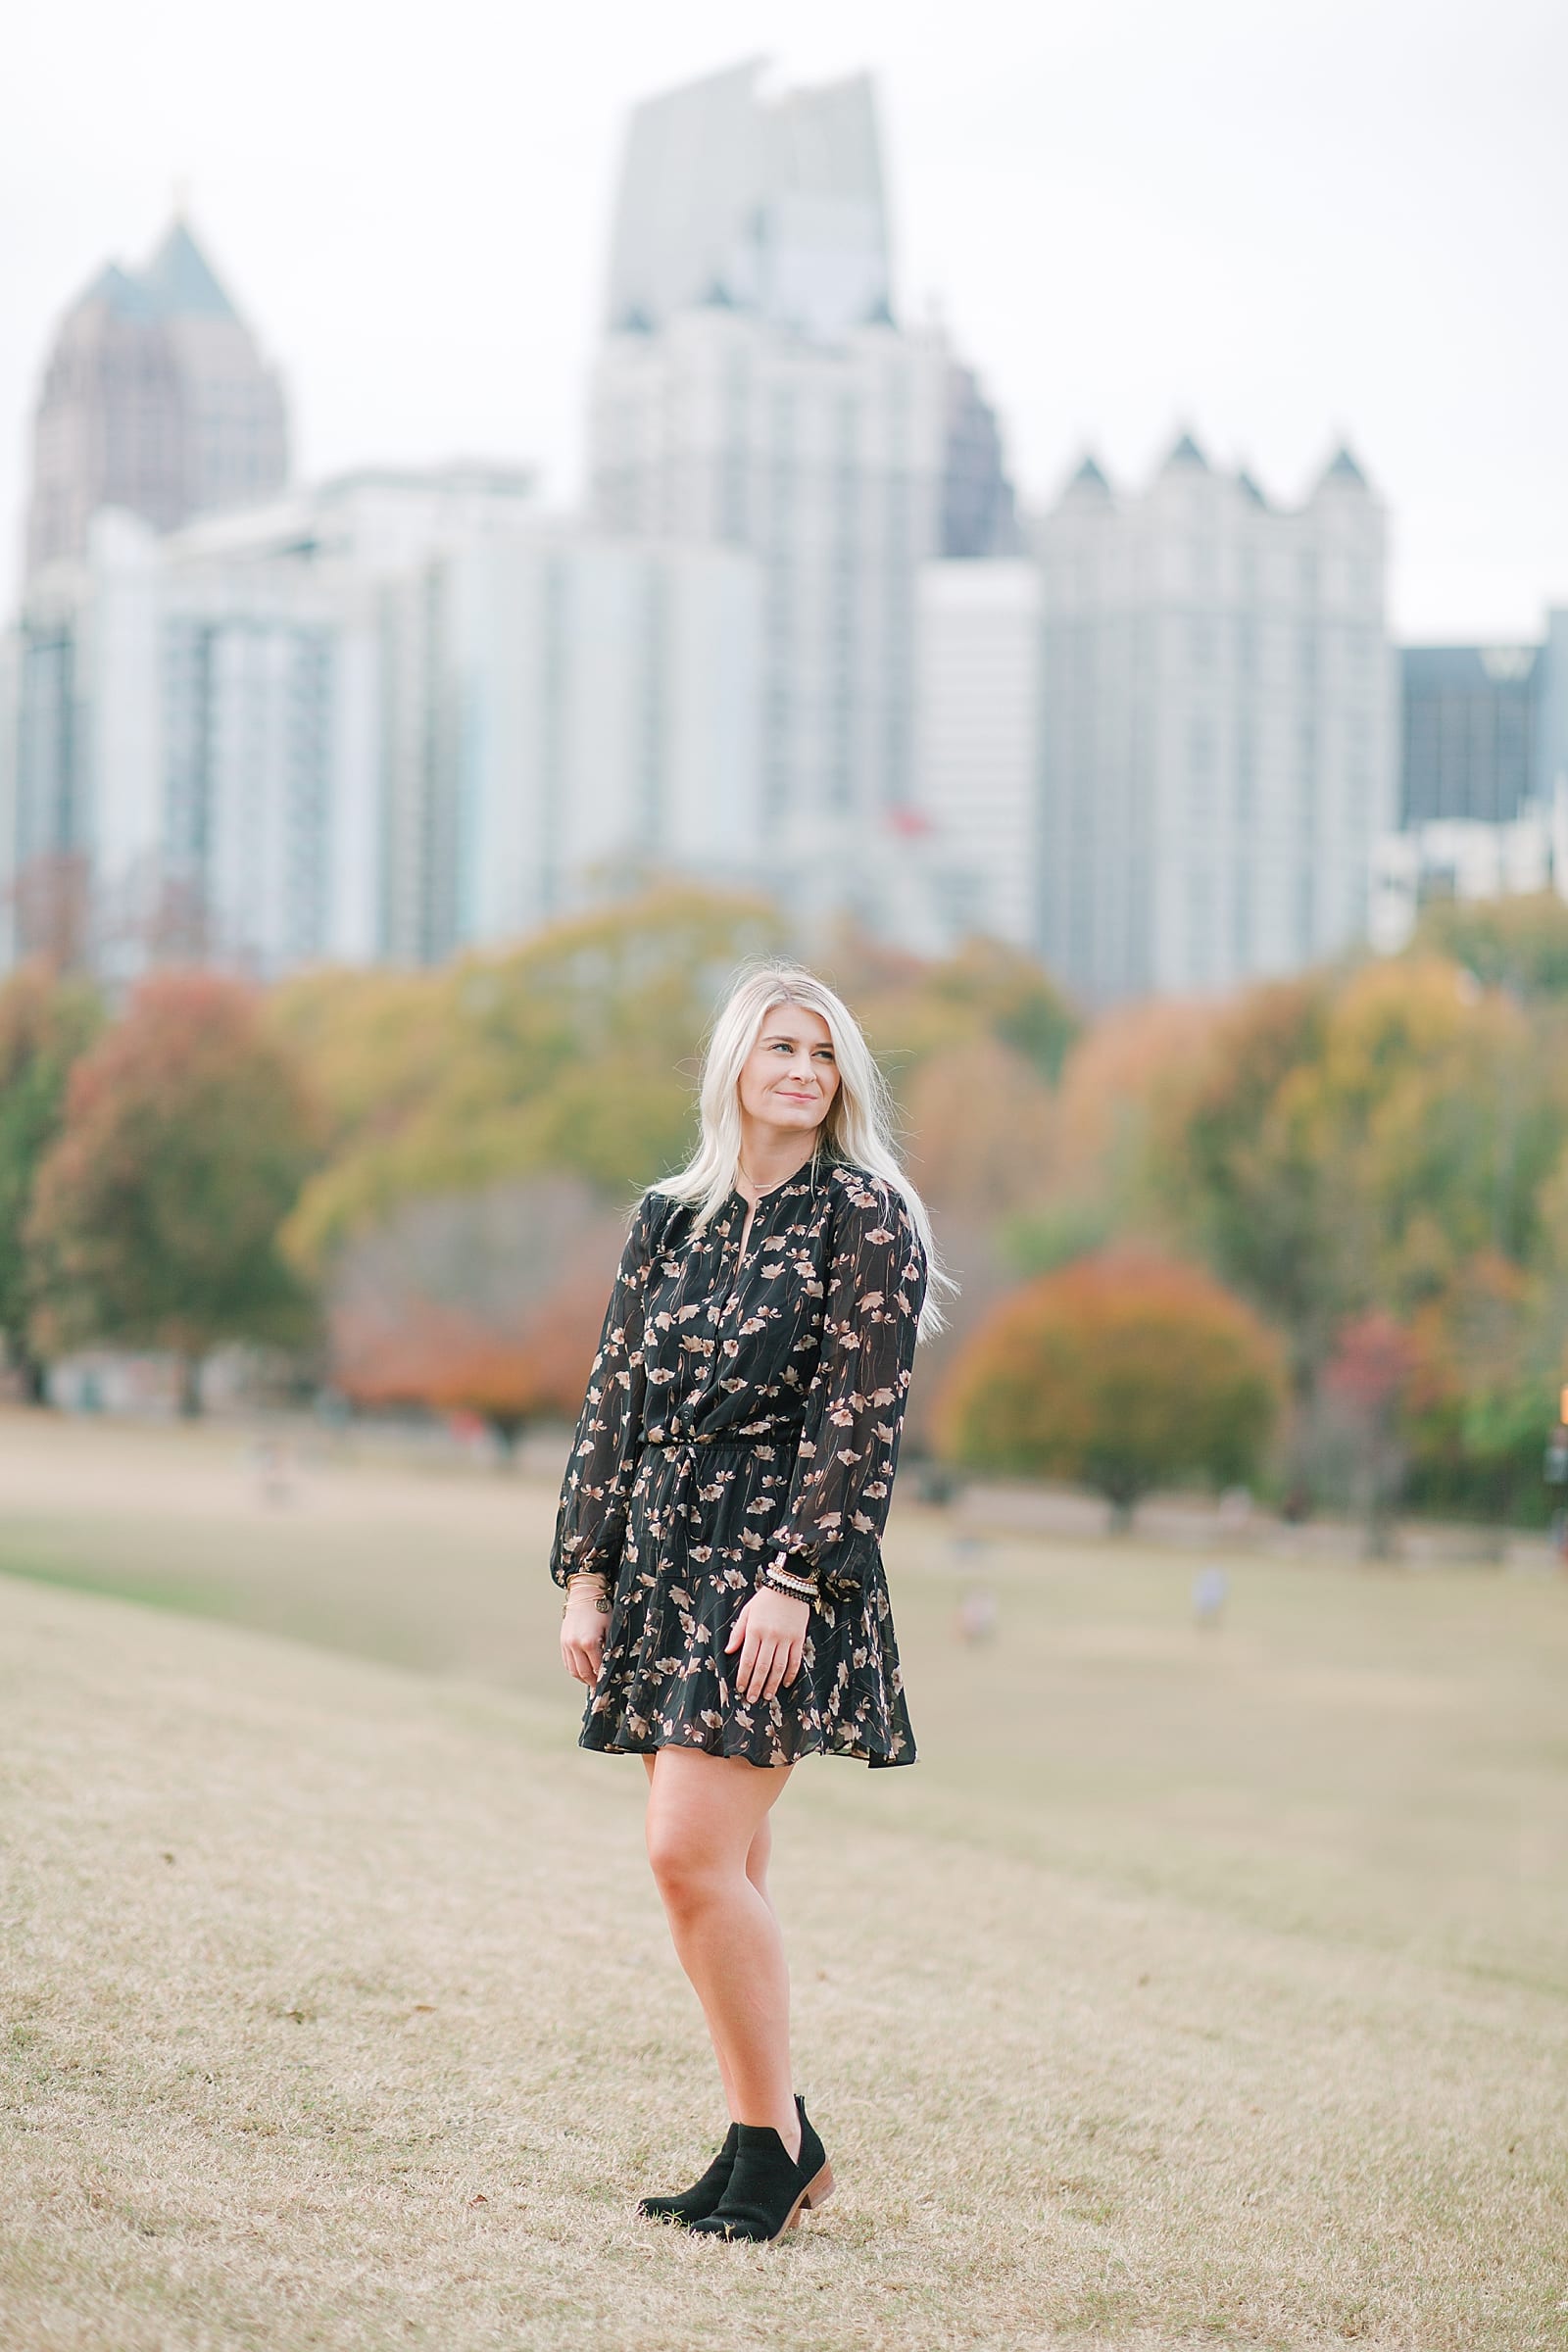 Cute Girl in Black Dress Looking off with Atlanta Skyline in Background Photo